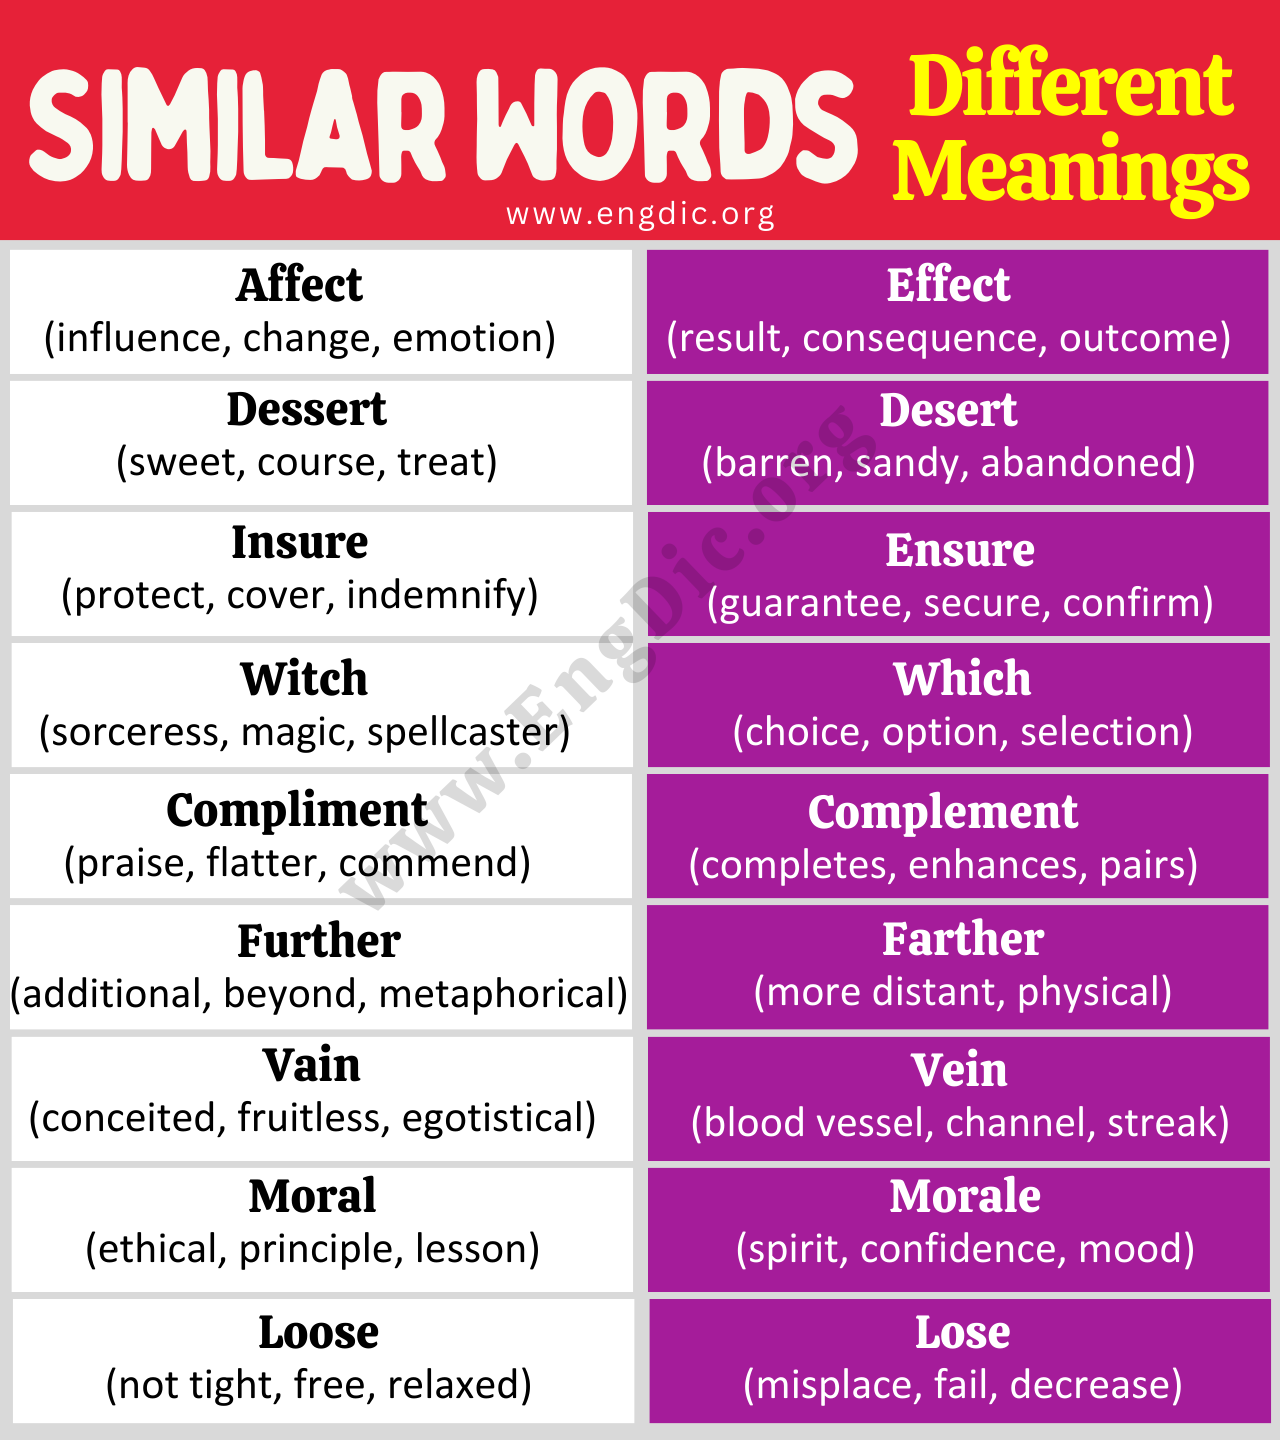 similar words with different meanings